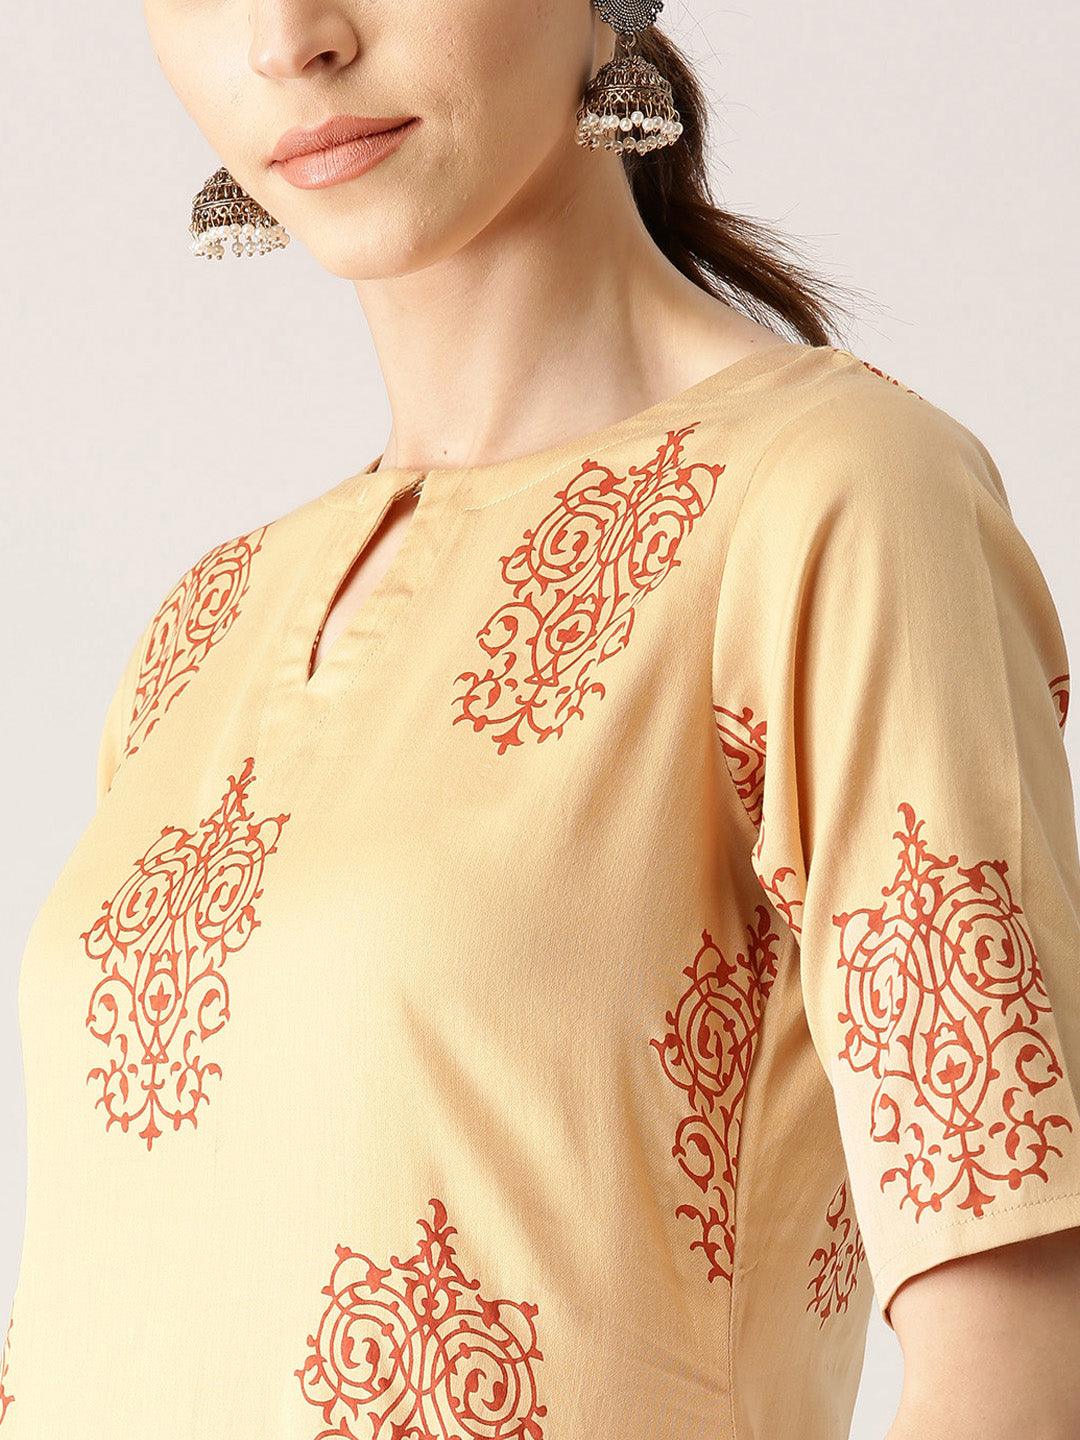 Beige Printed Cotton A-Line Kurta With Trousers